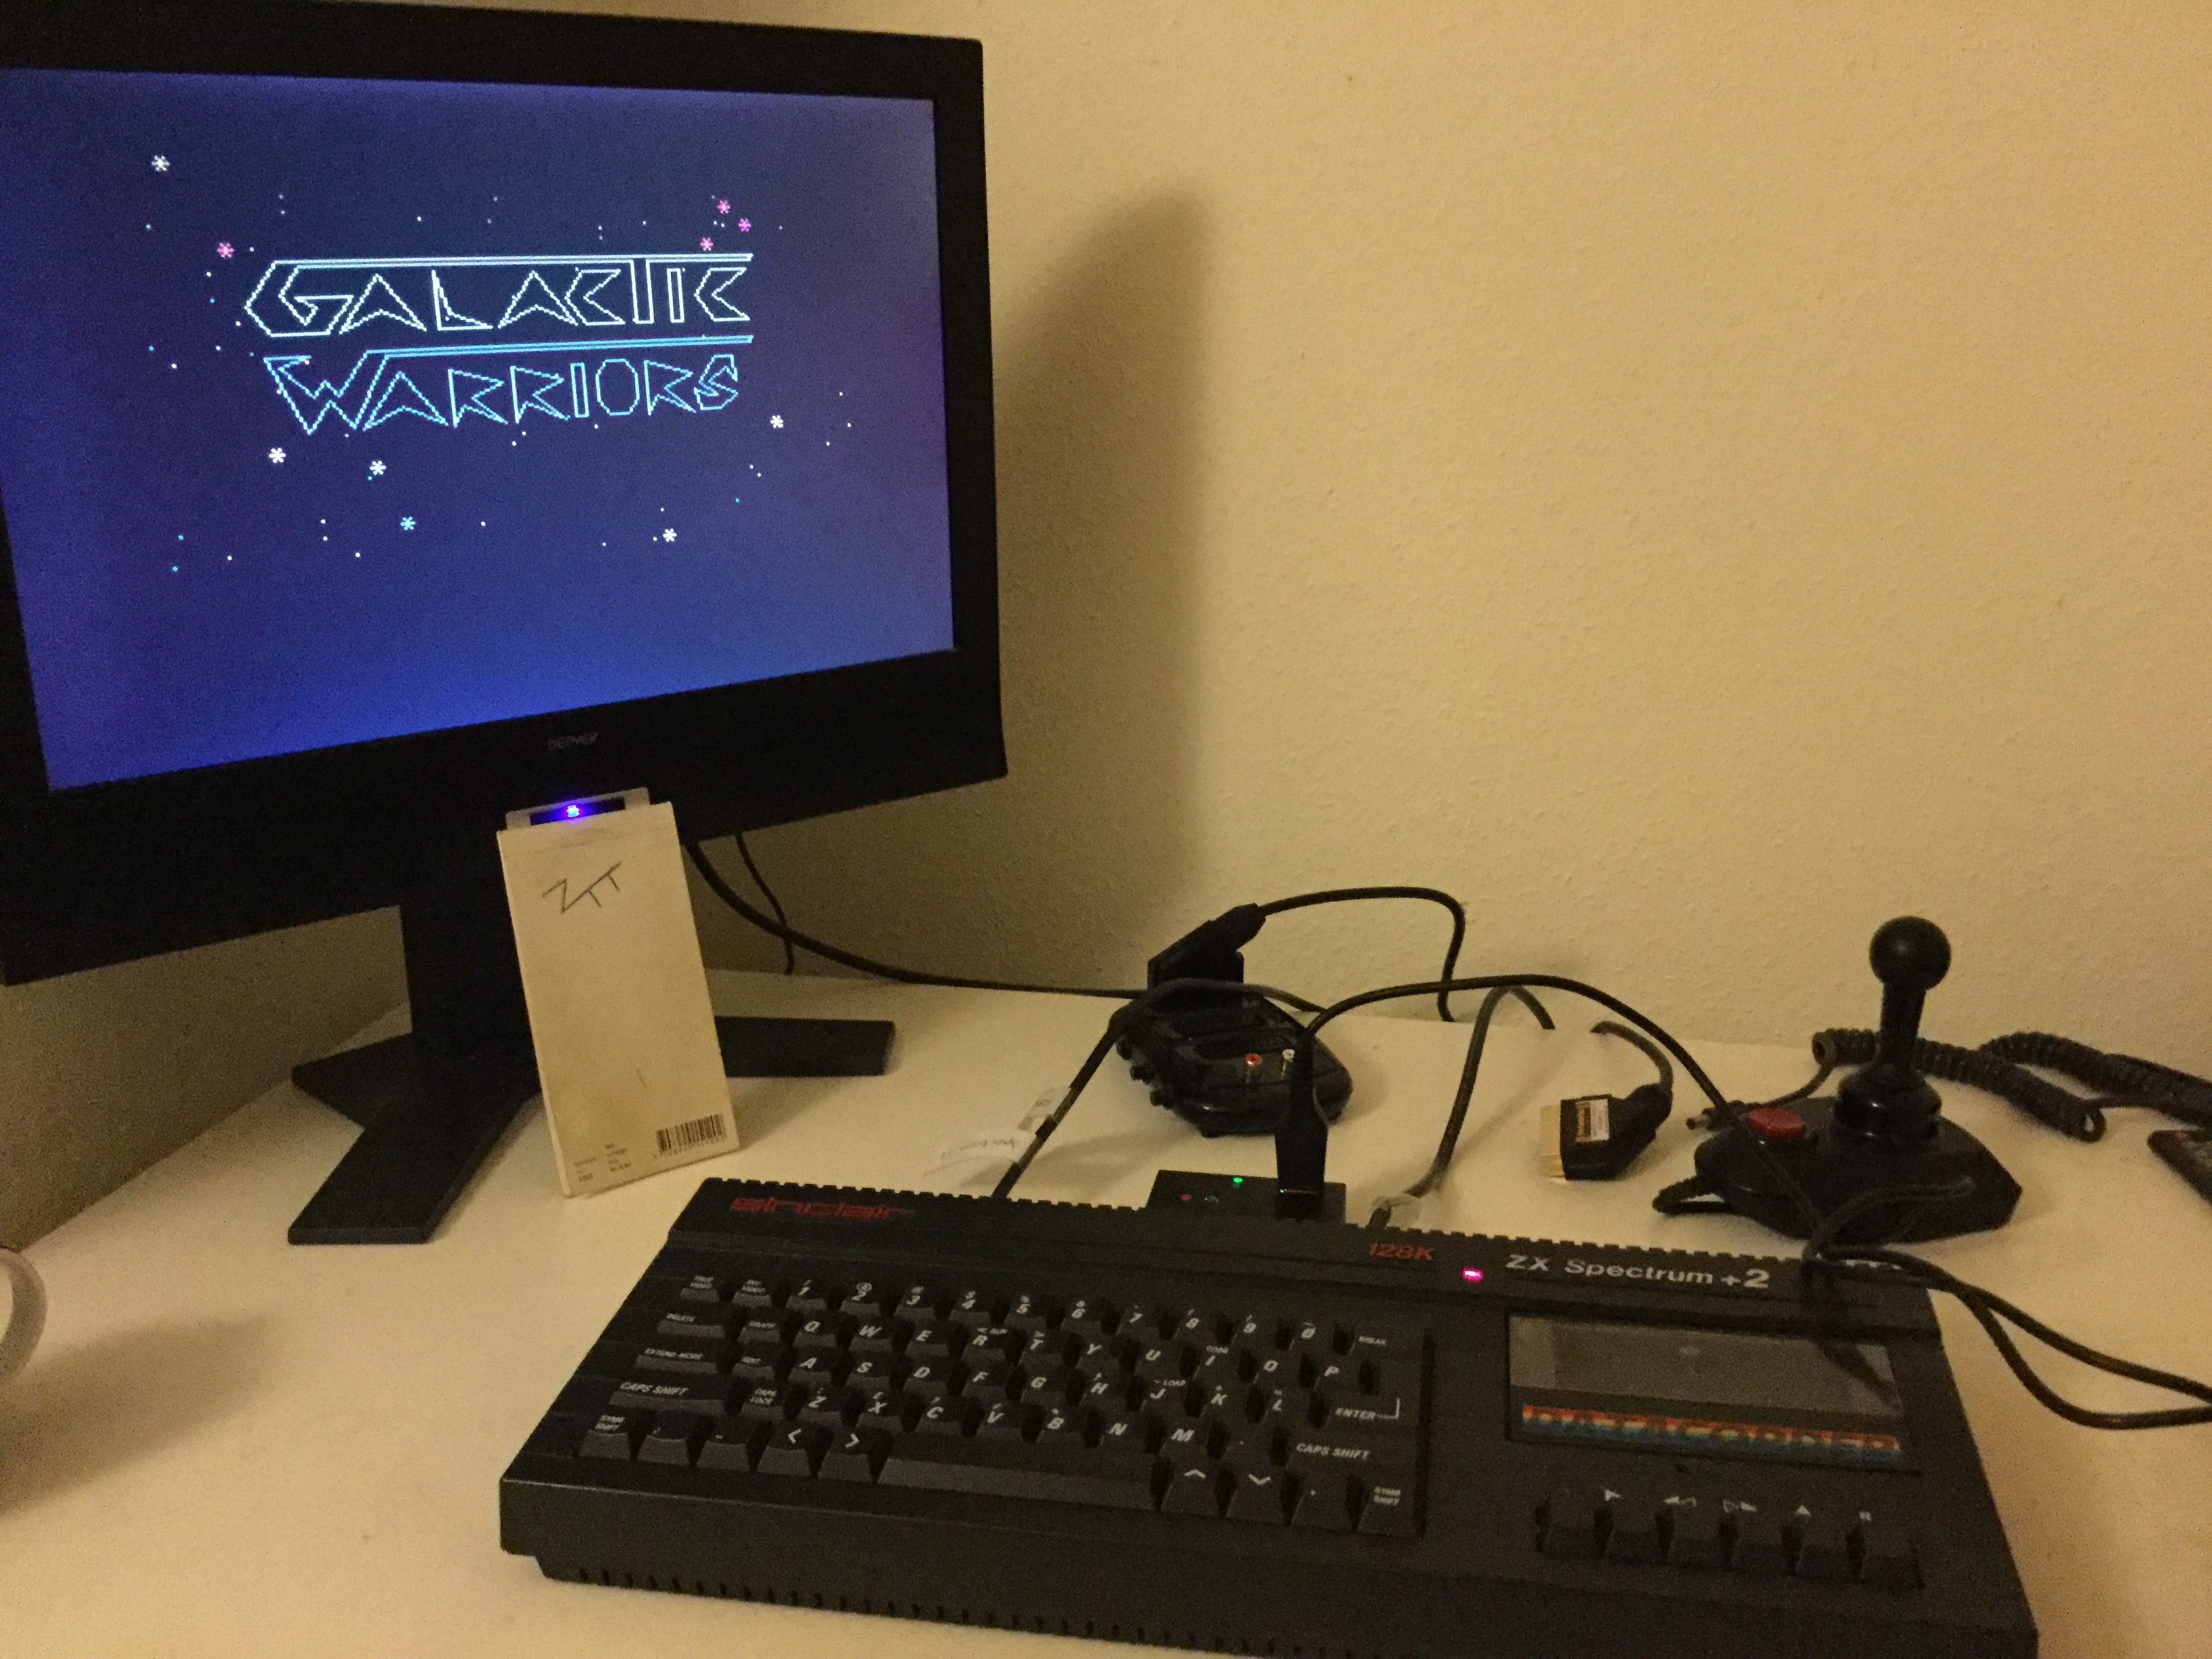 Frankie: Galactic Warriors [Abacus Programs] (ZX Spectrum) 6,860 points on 2020-03-05 00:36:06